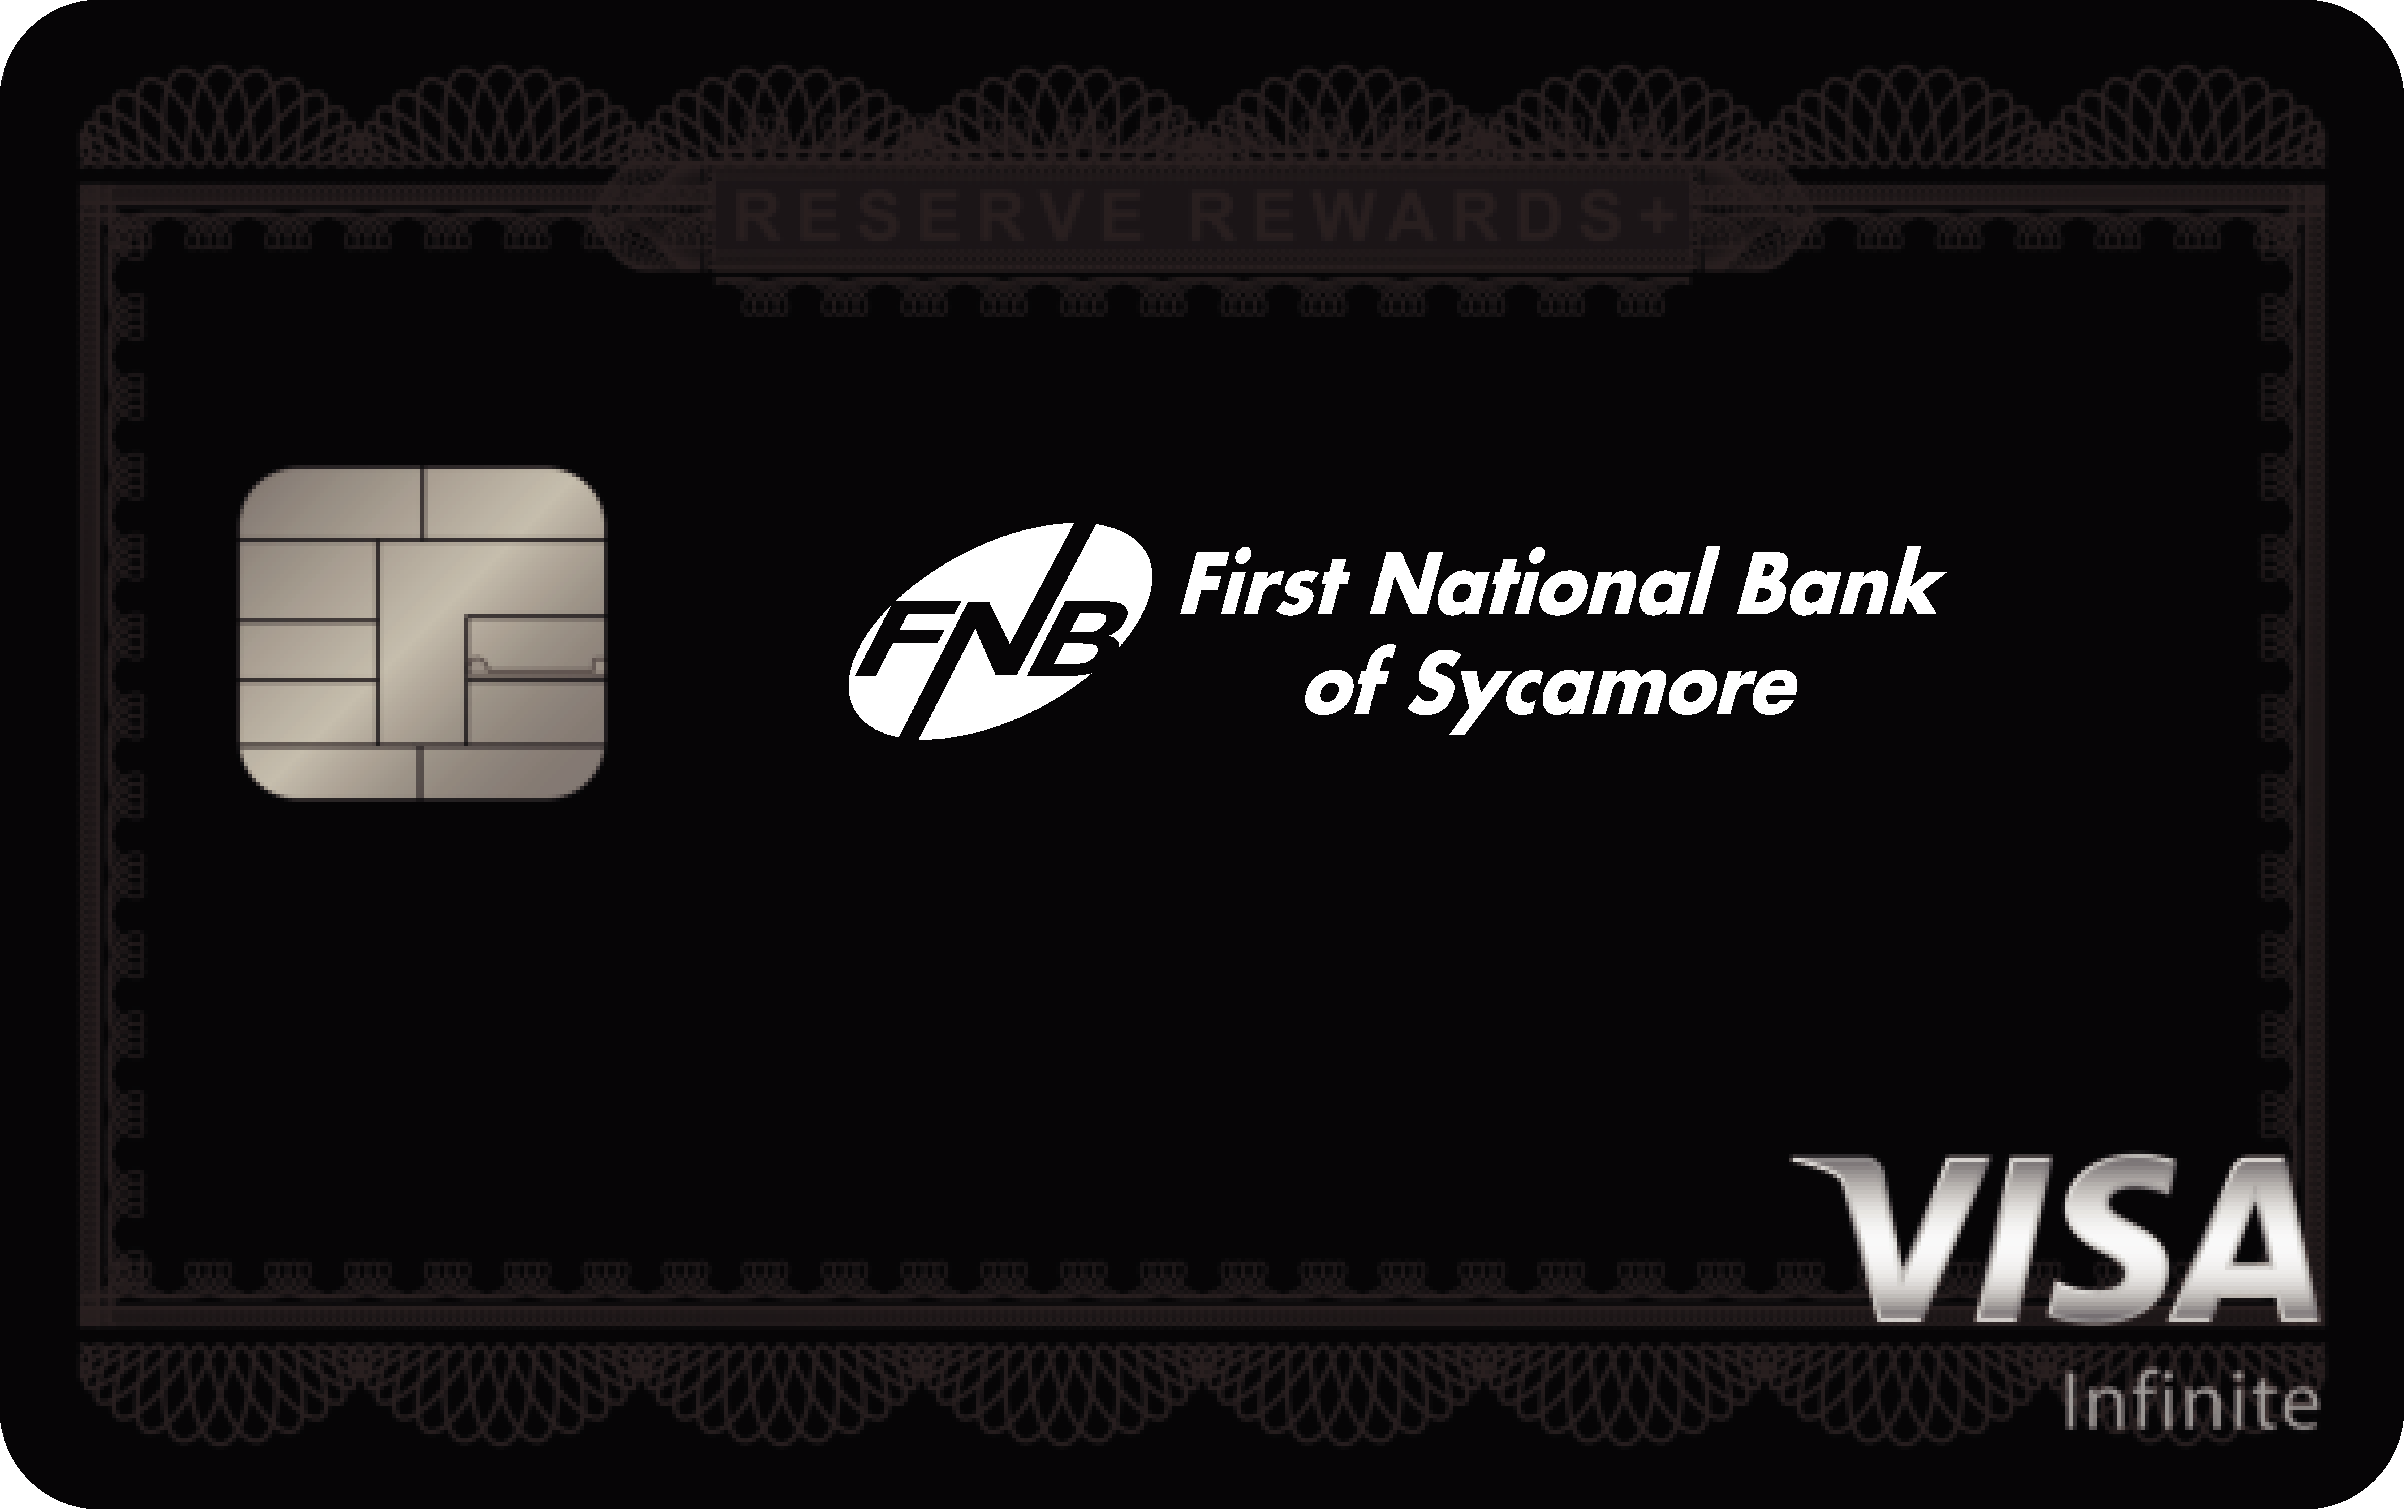 First National Bank of Sycamore Reserve Rewards+ Card